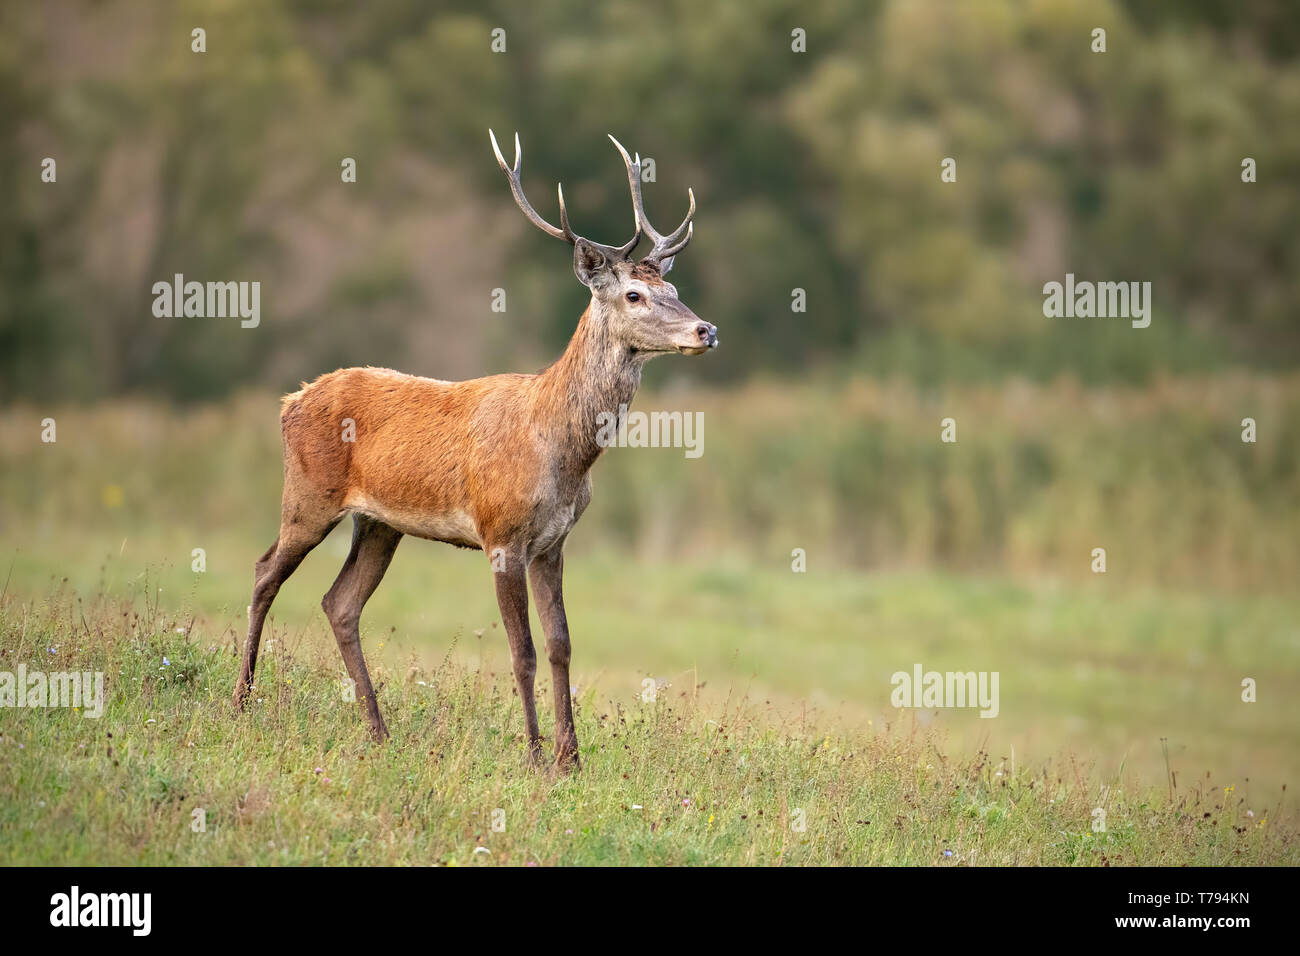 Young red deer, cervus elaphus, stag in summer on a meadow with short green grass. Wild animal in nature. Stock Photo